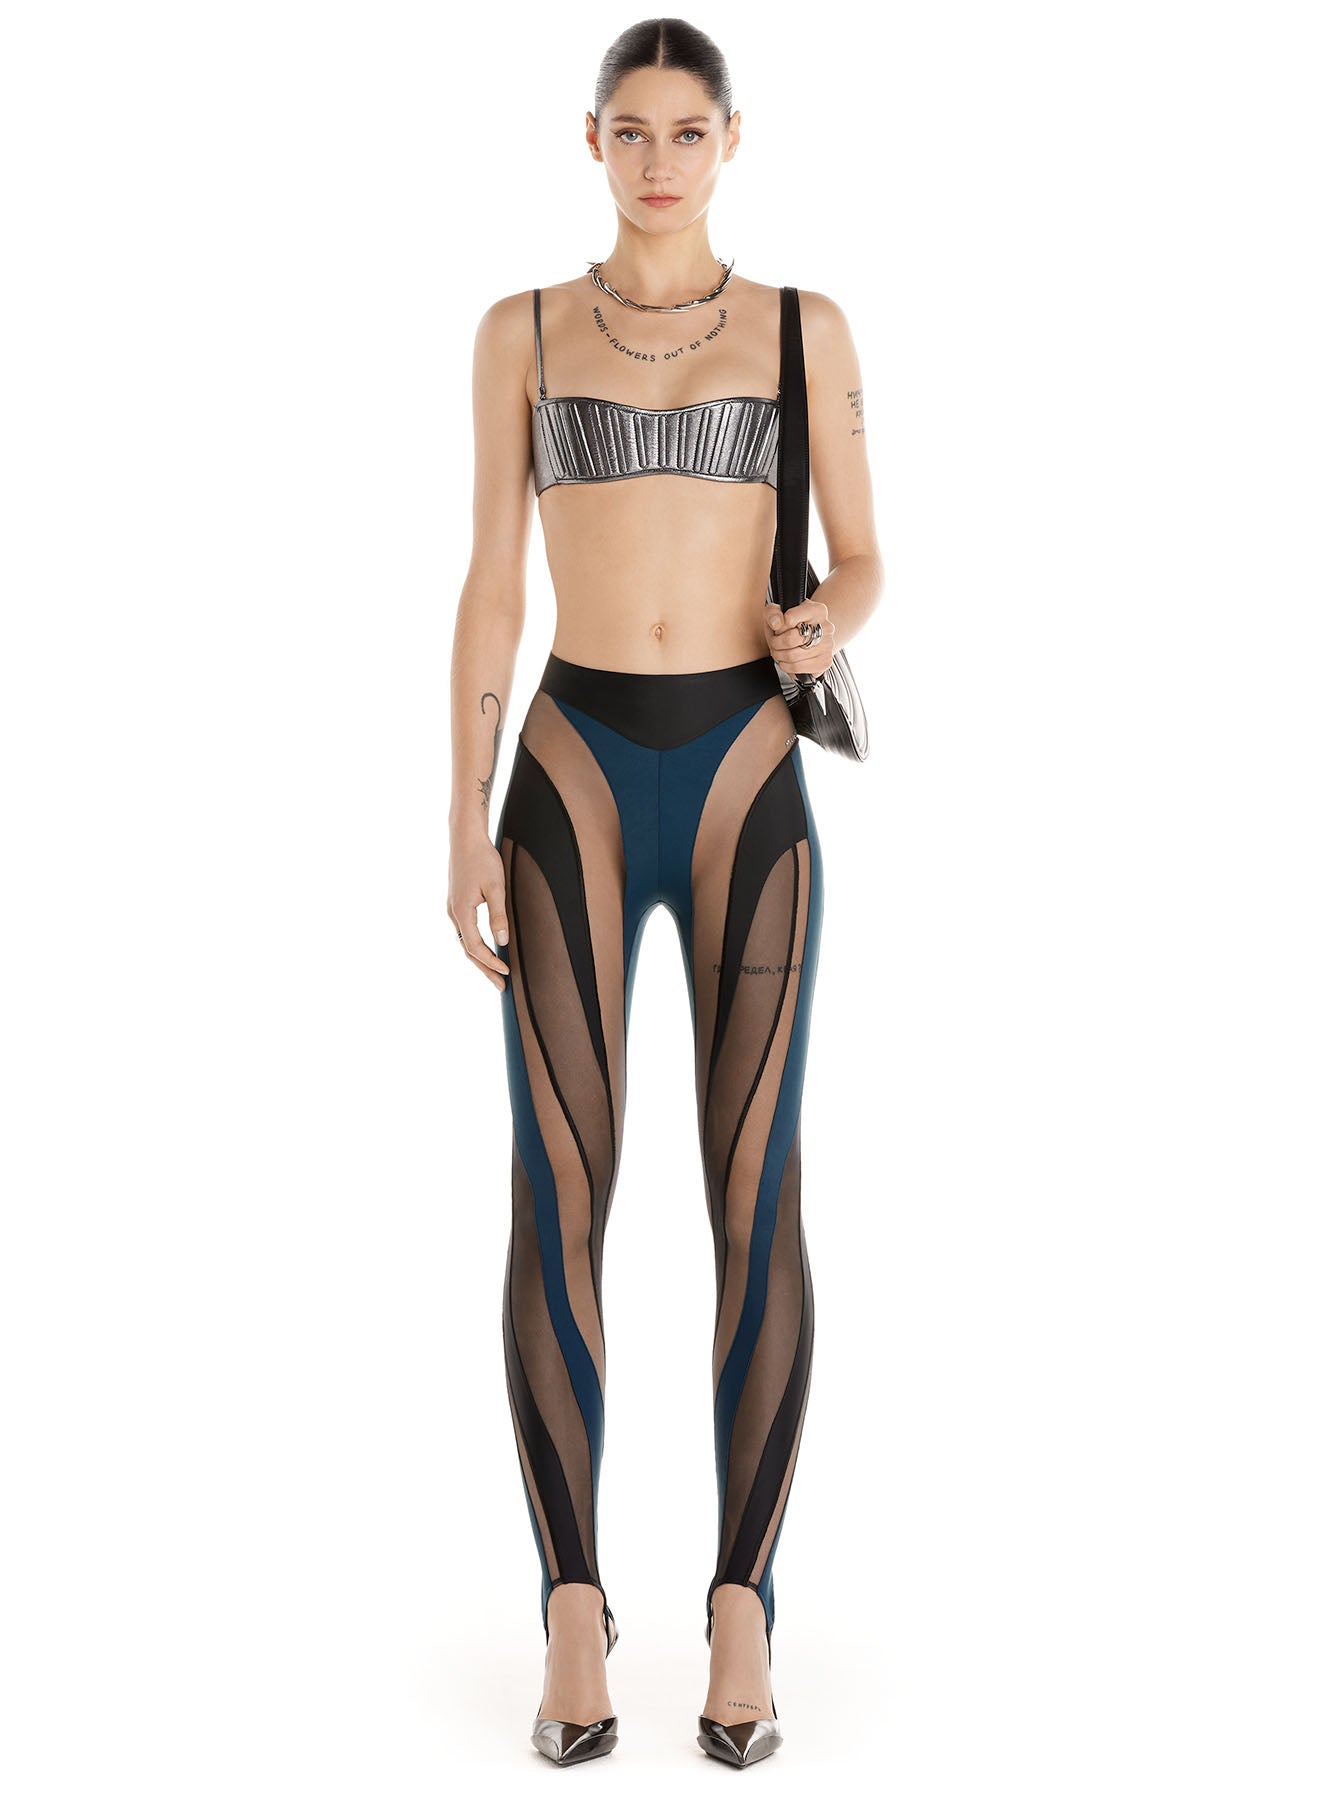 19 Amazon Tights for Women You Need in 2023 - PureWow